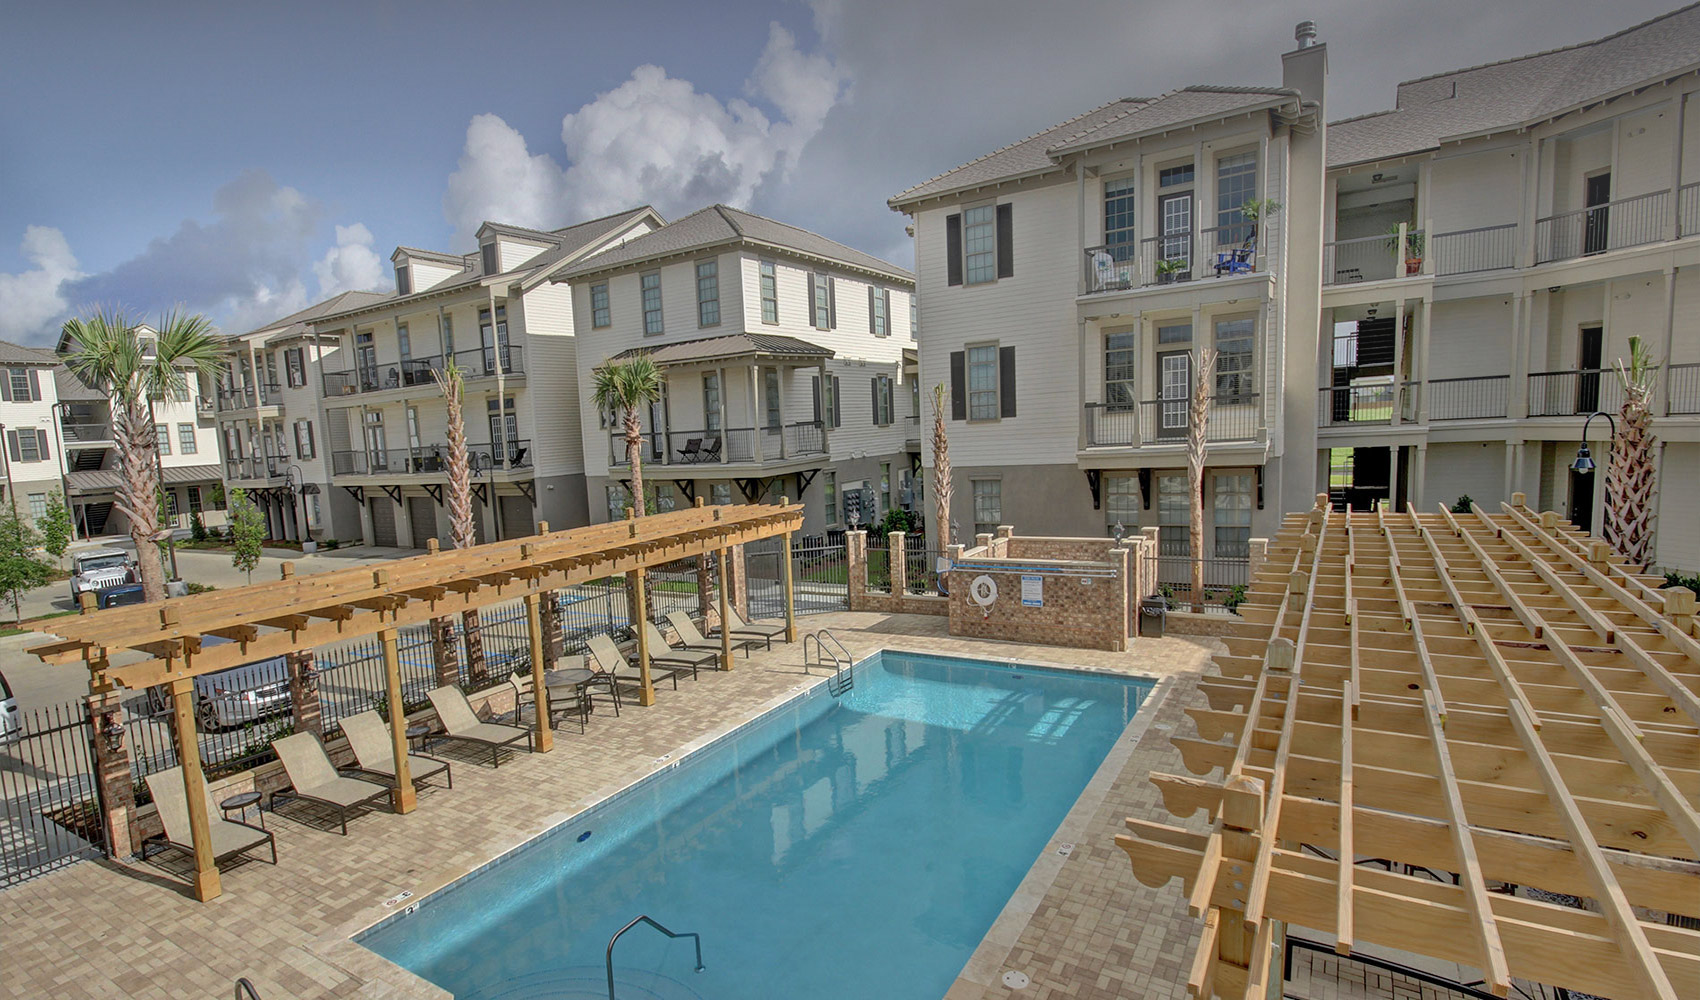 Apartments in Youngsville, LA